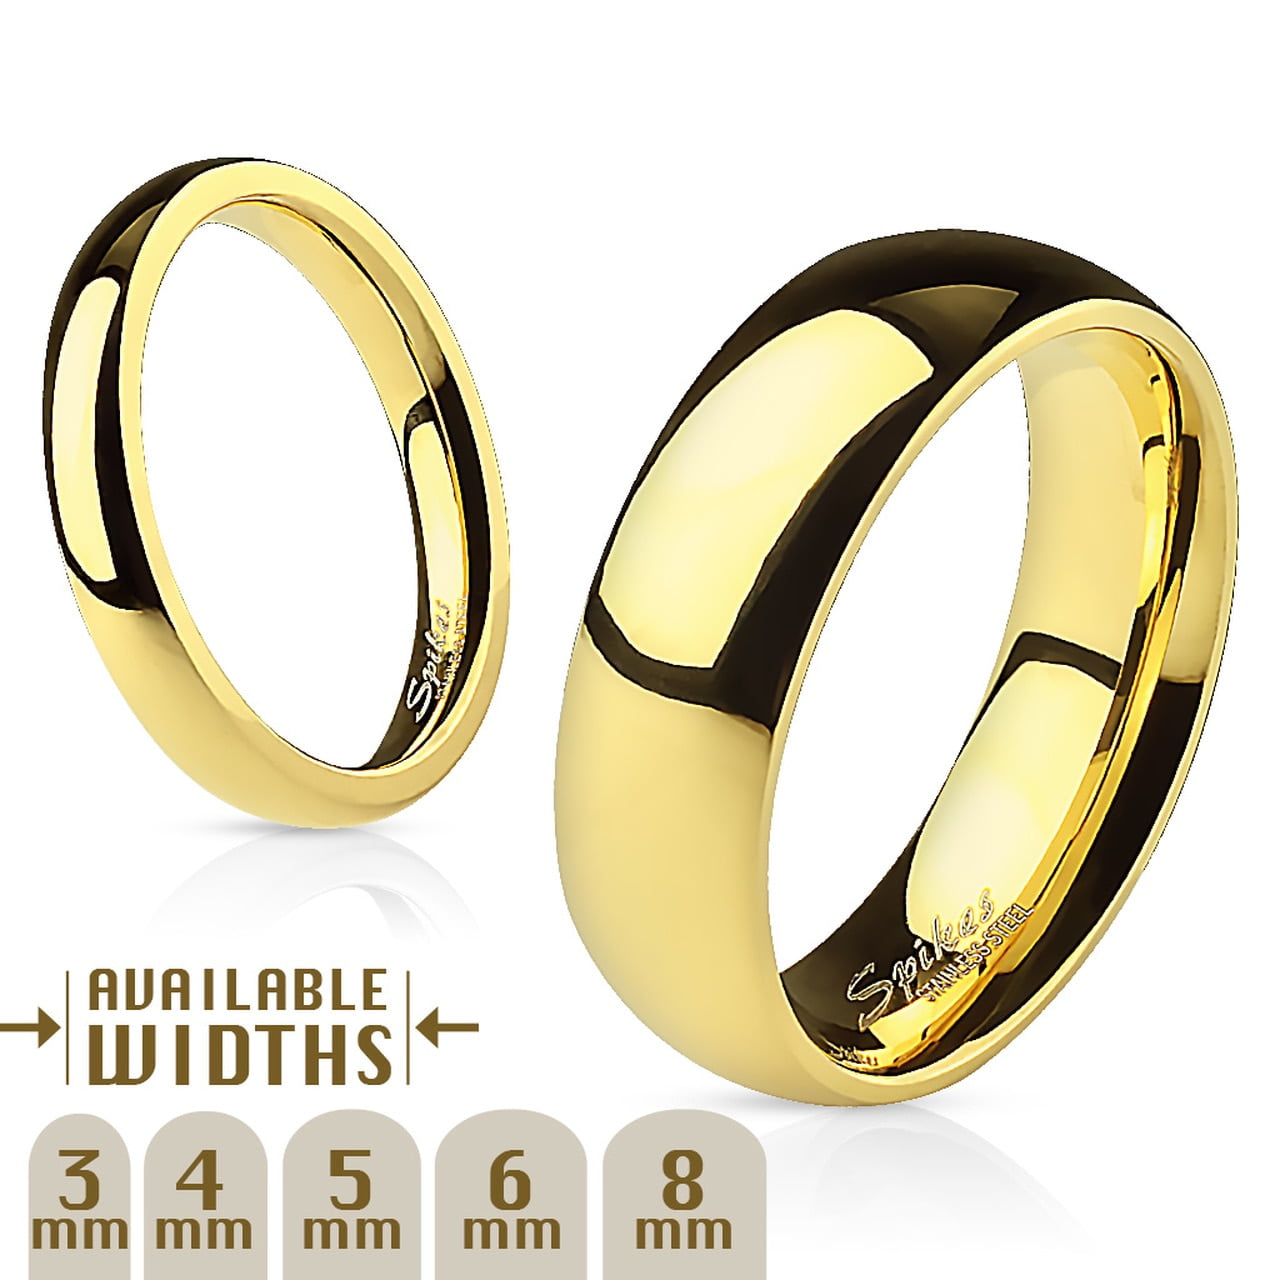 5mm Yellow Gold Tungsten Carbide Wedding Ring Comfort Fit Band Unisex Classic 